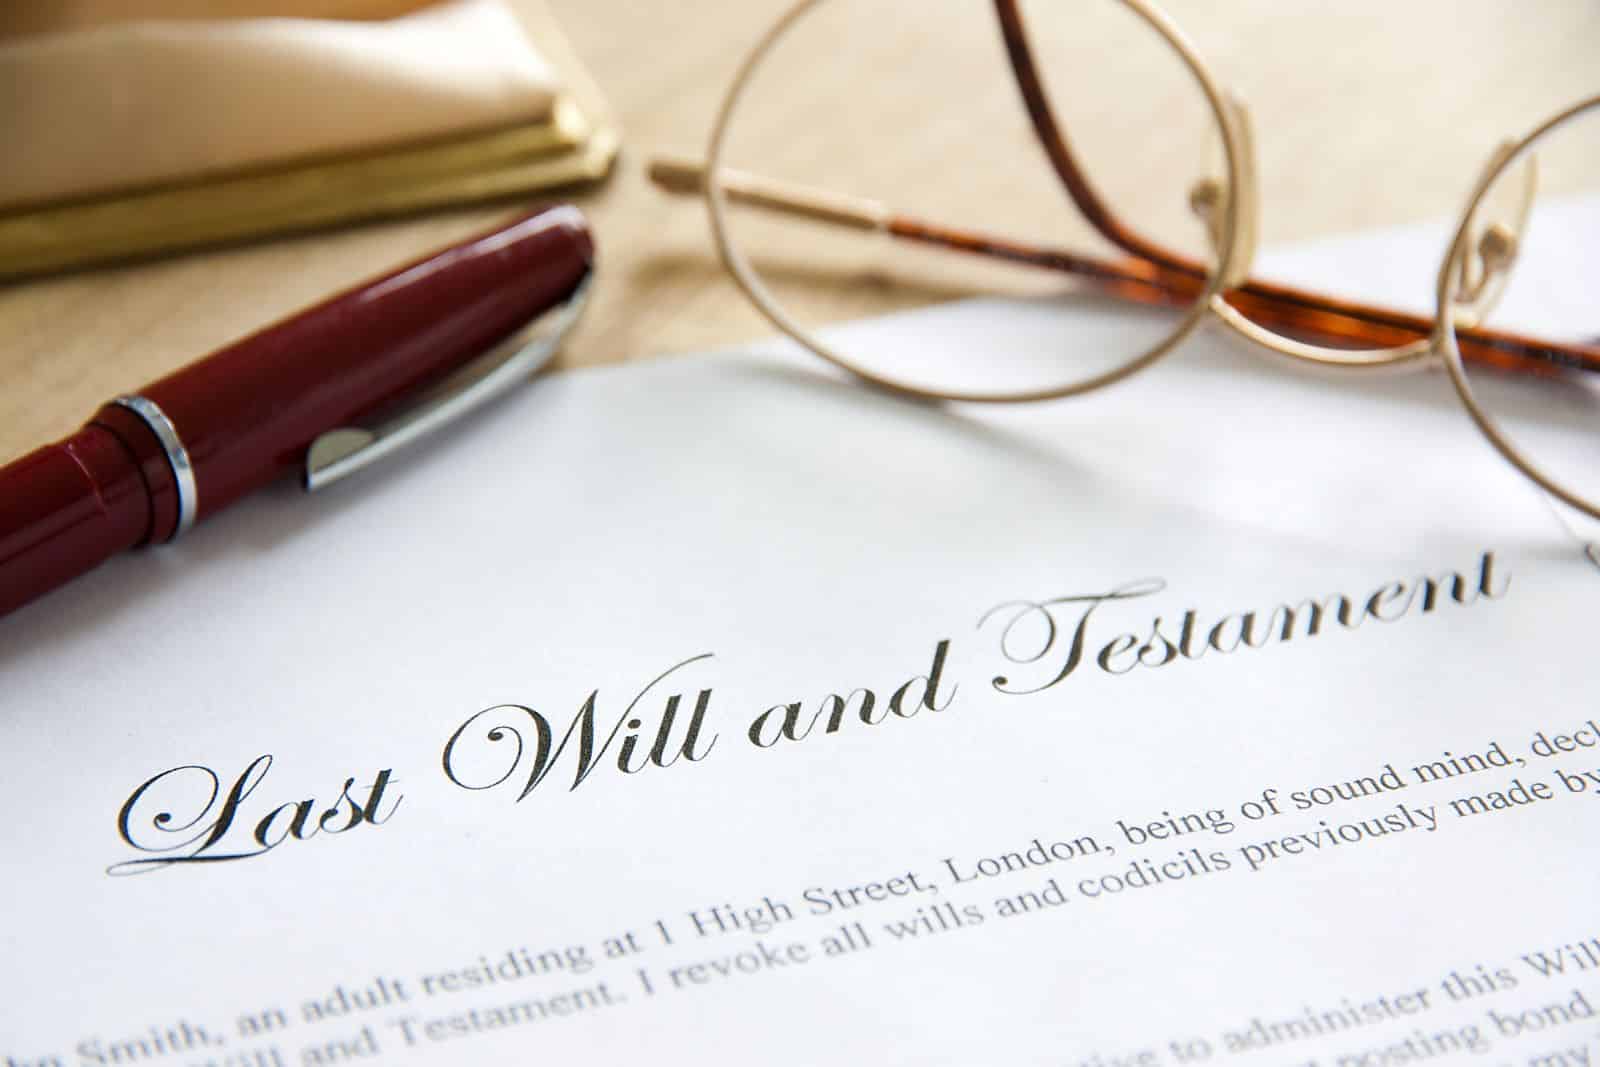 Image Credit: Shutterstock / SteveWoods <p>A will is fundamental. It dictates how your assets are distributed and can help prevent family disputes. Without one, state laws determine who gets what.</p>